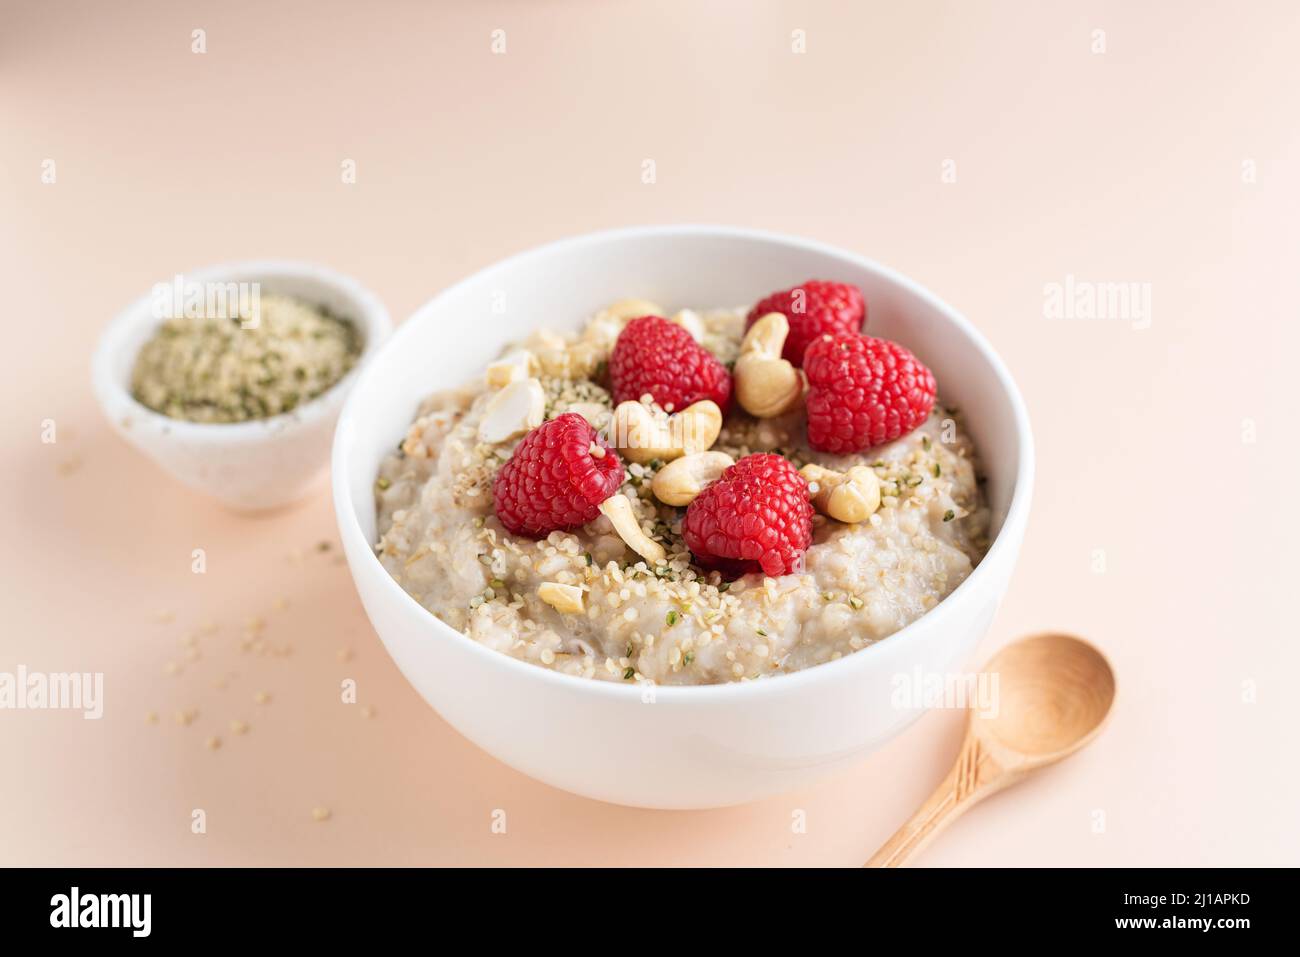 Oatmeal porridge with rasbperries, hemp seeds and cashews on beige background. Healthy breakfast food for dieting, weight loss Stock Photo